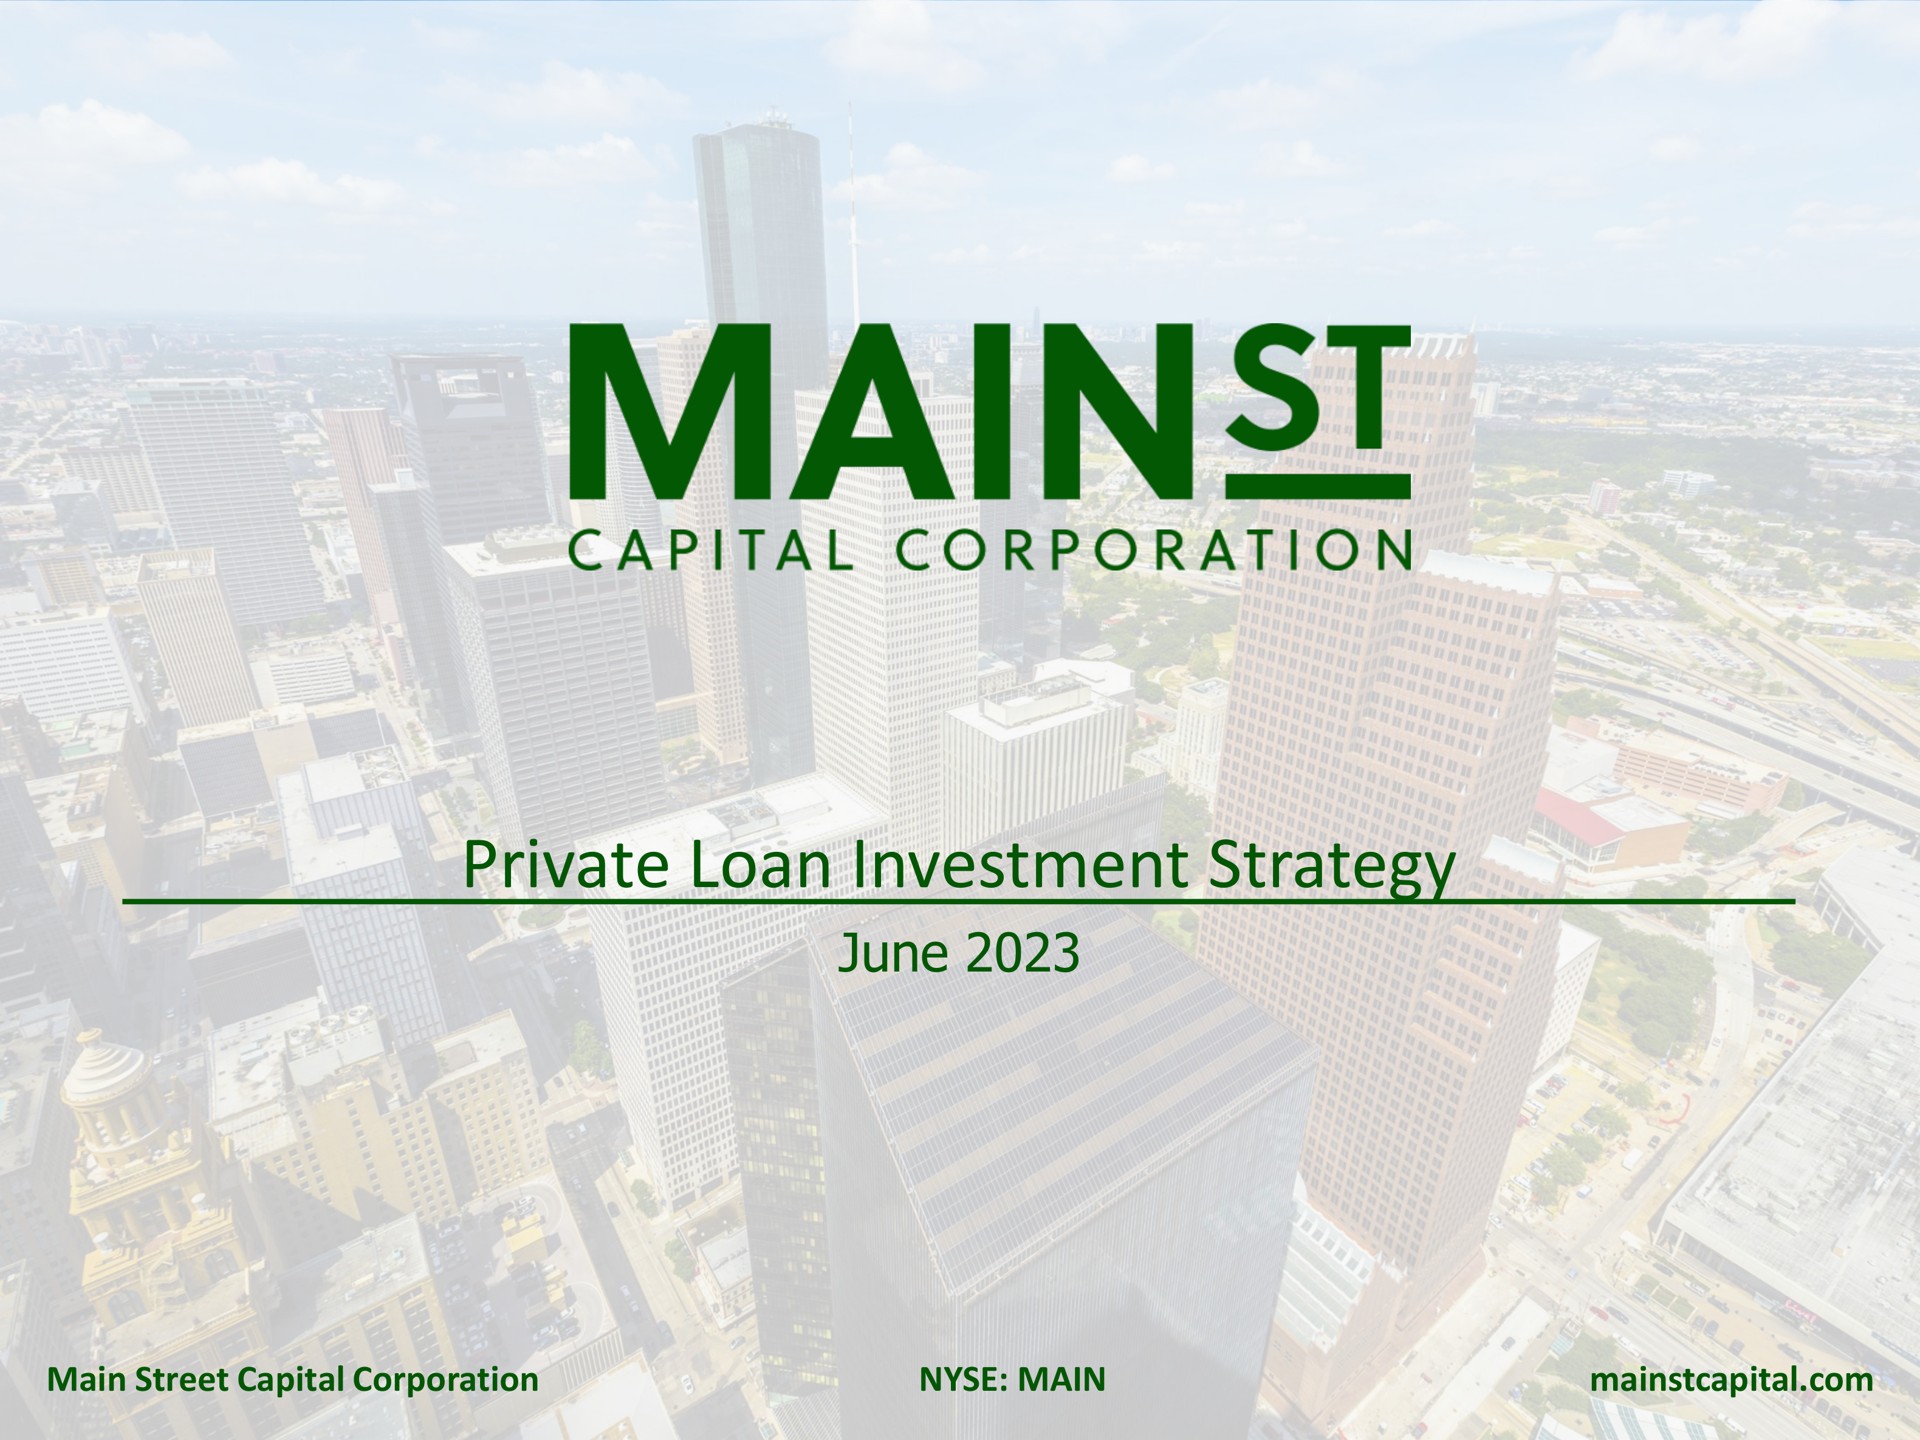 private loan investment strategy june mains capital corporation | Main Street Capital